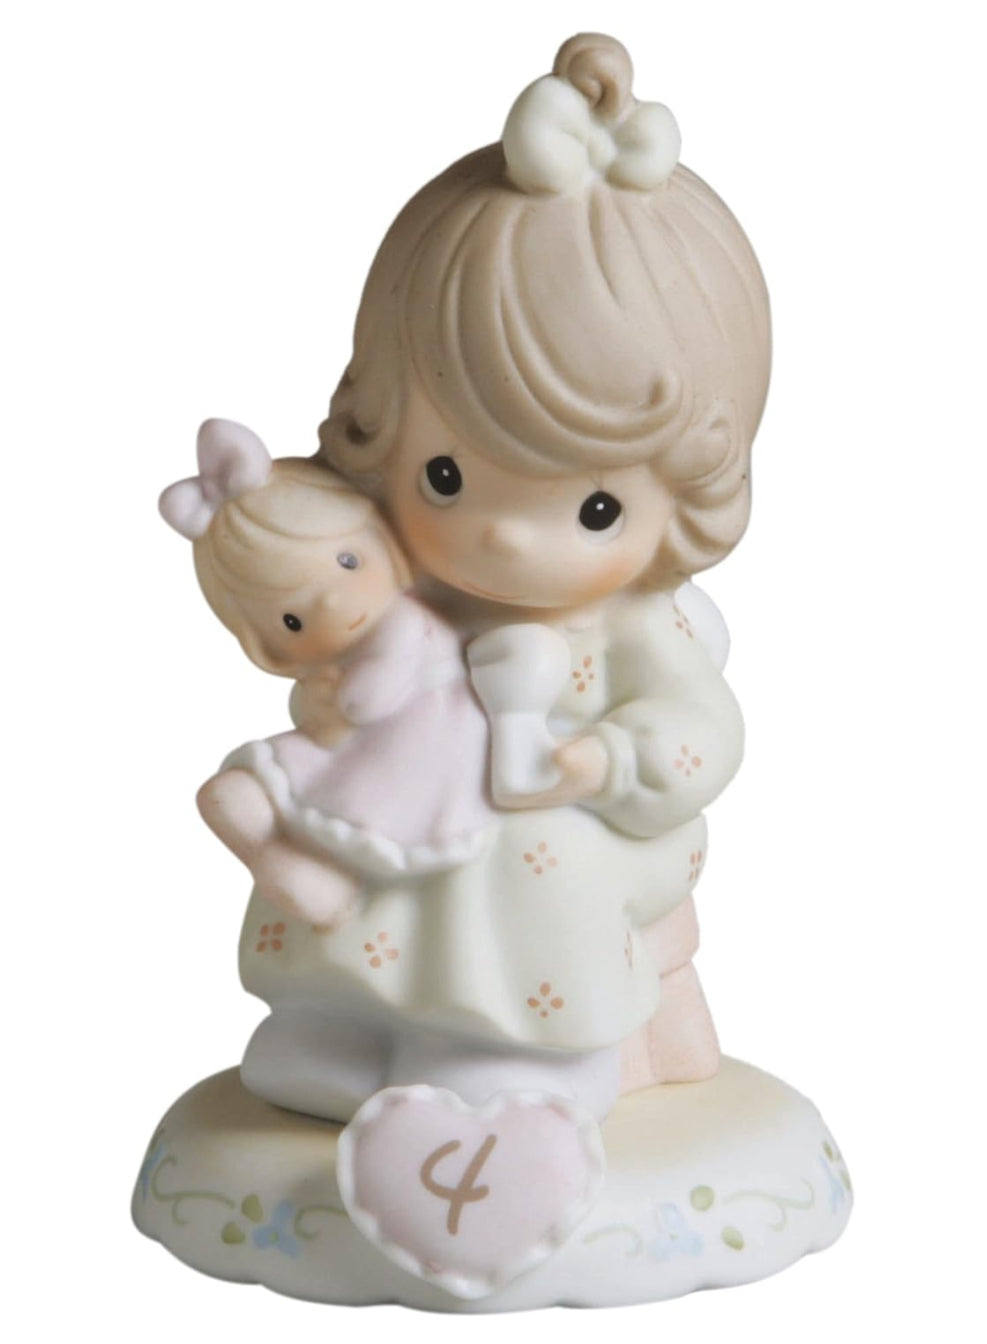 Growing in Grace Age 4 - Precious Moment Figurine 136239